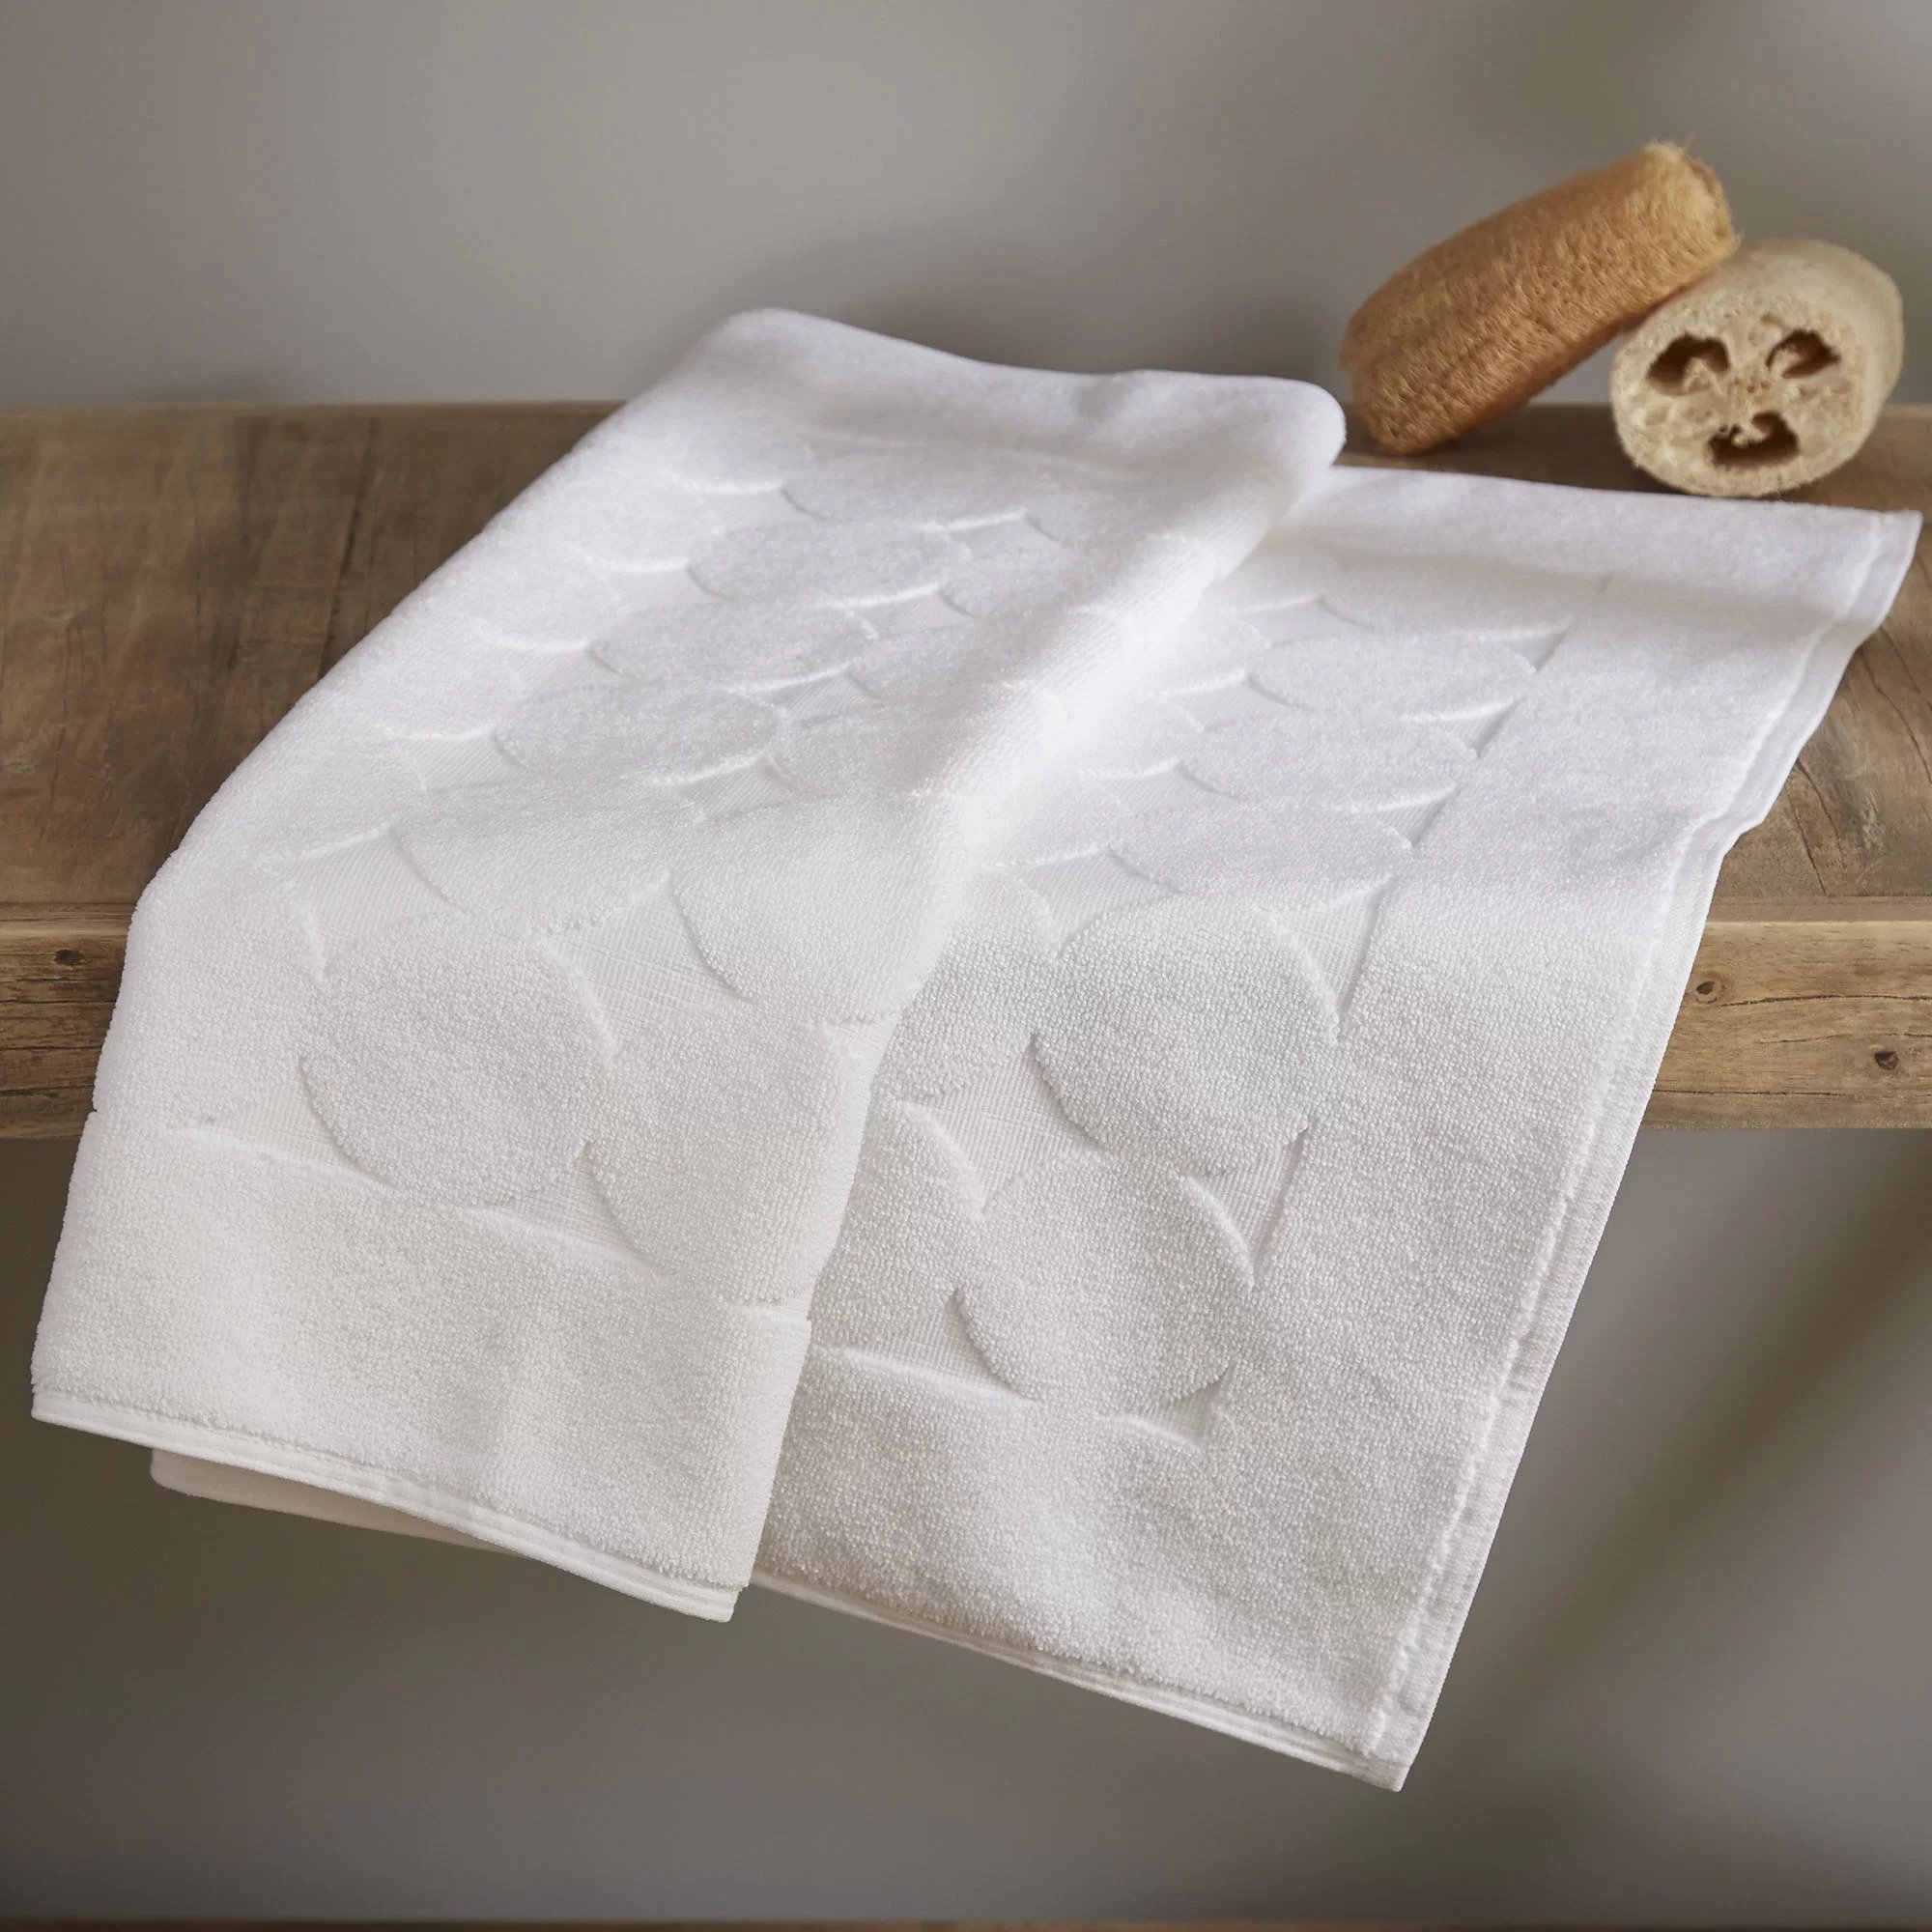 The white bath mat with an embossed circle design